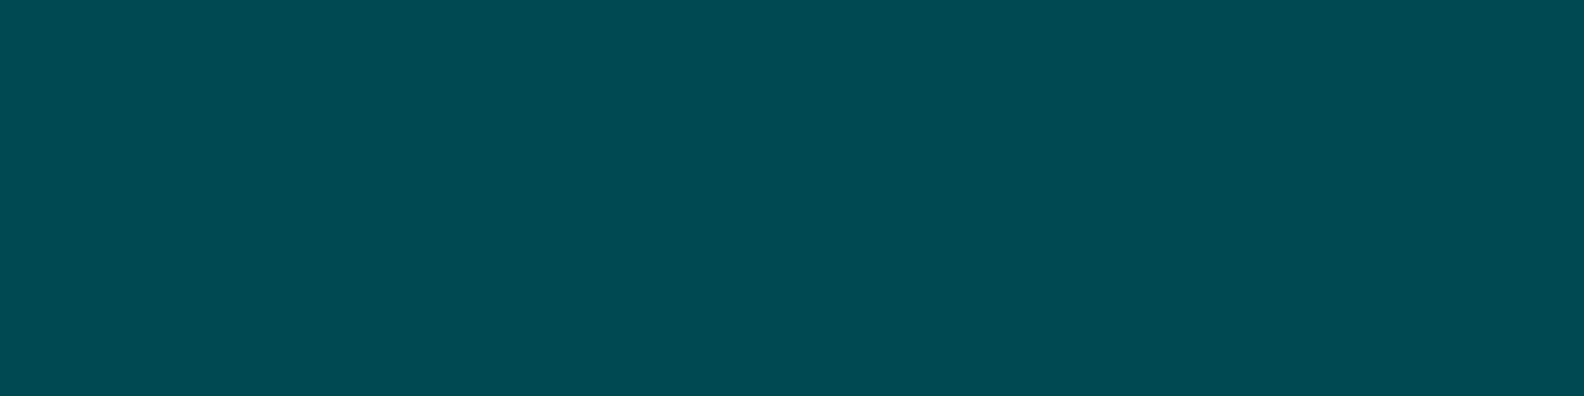 1584x396 Midnight Green Solid Color Background